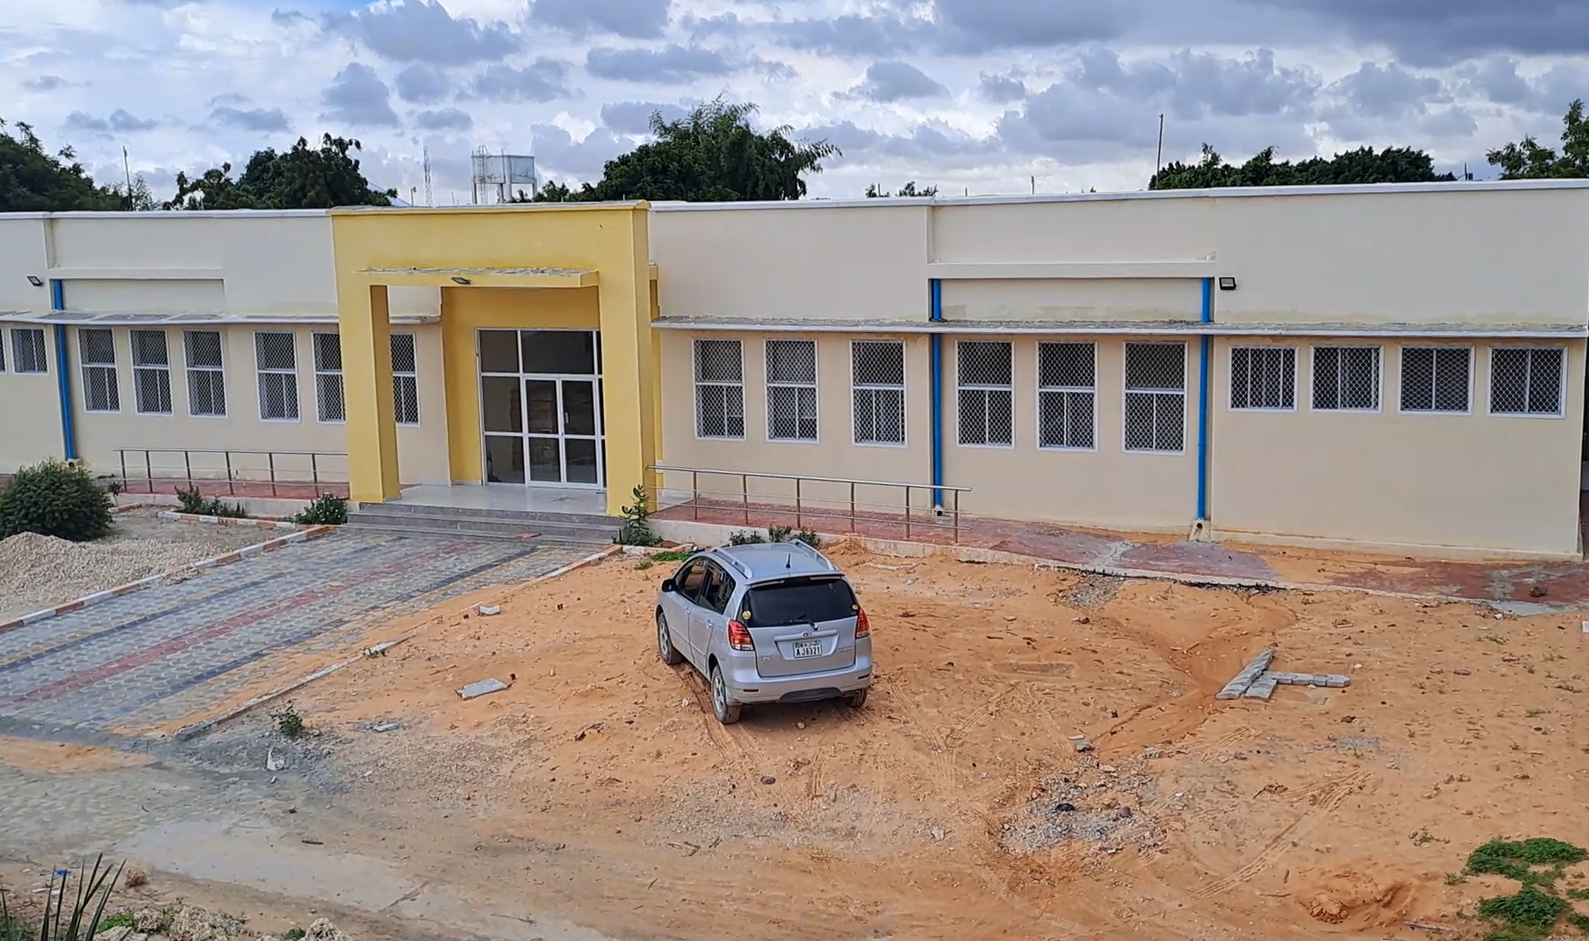 The new hospital building, supported by Concern and UNICEF